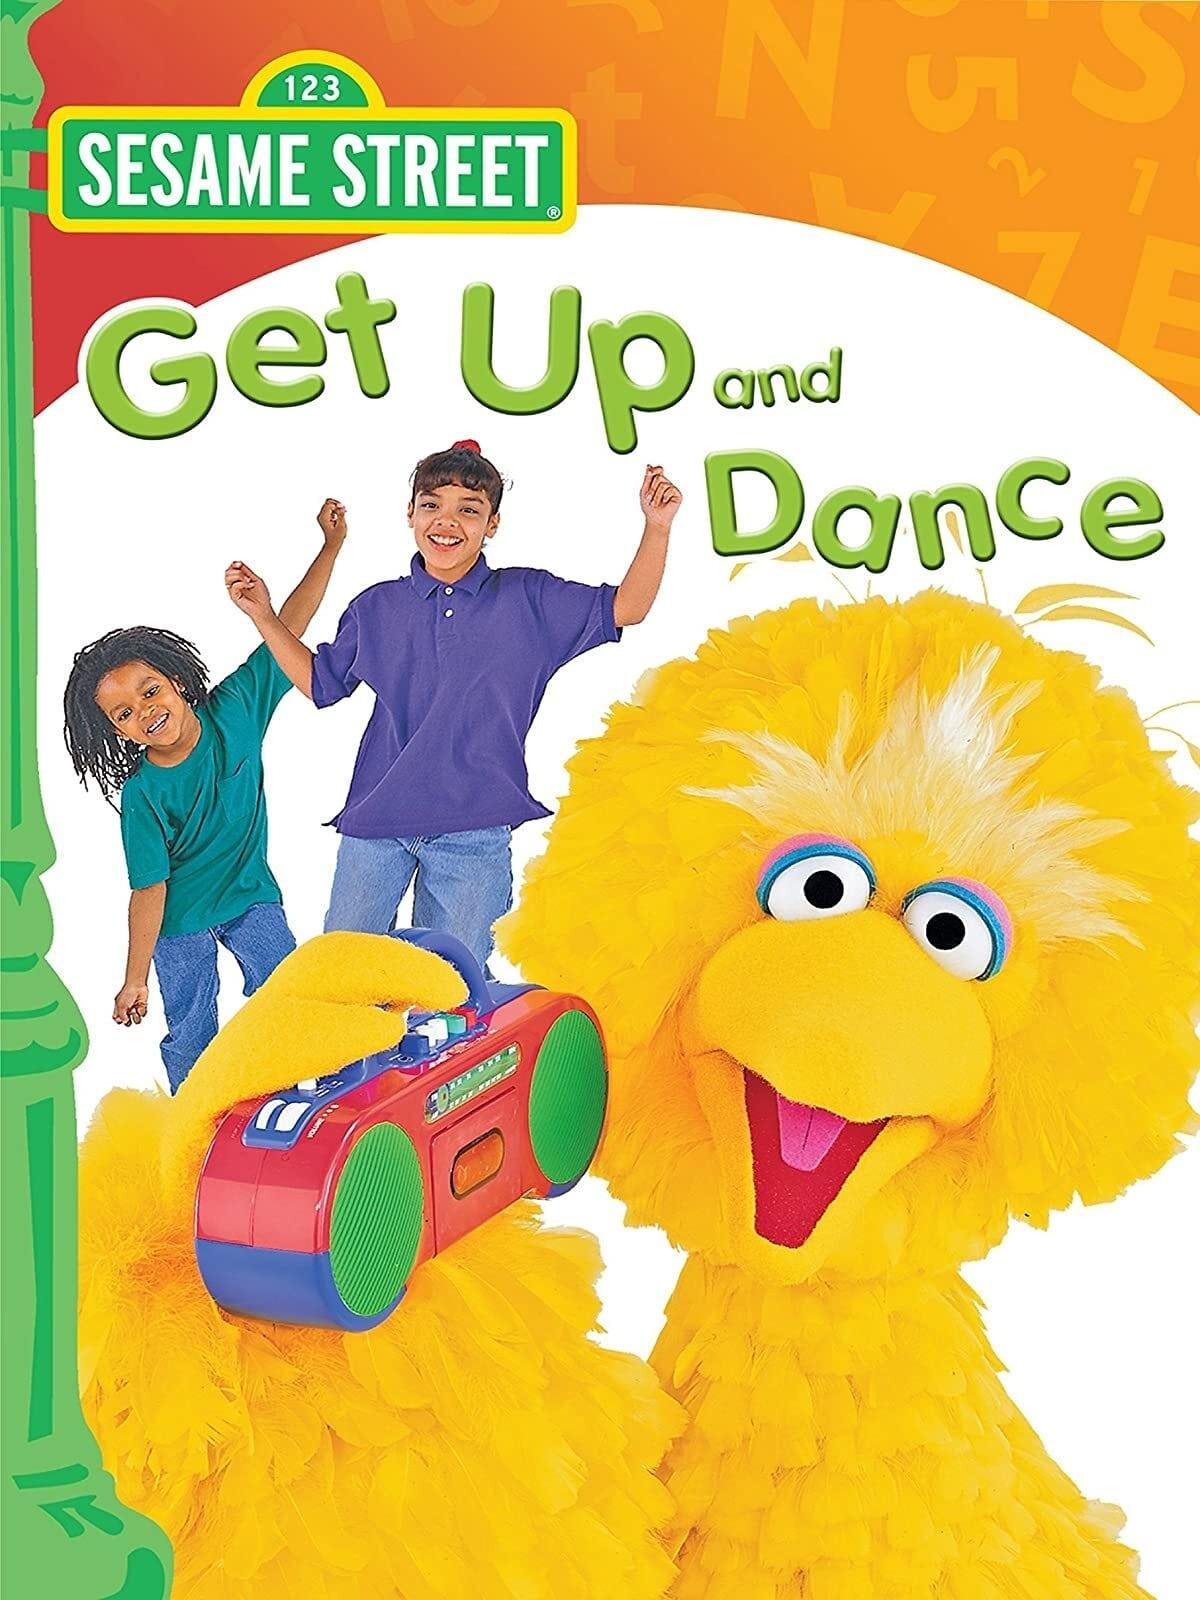 Sesame Street: Get Up and Dance poster